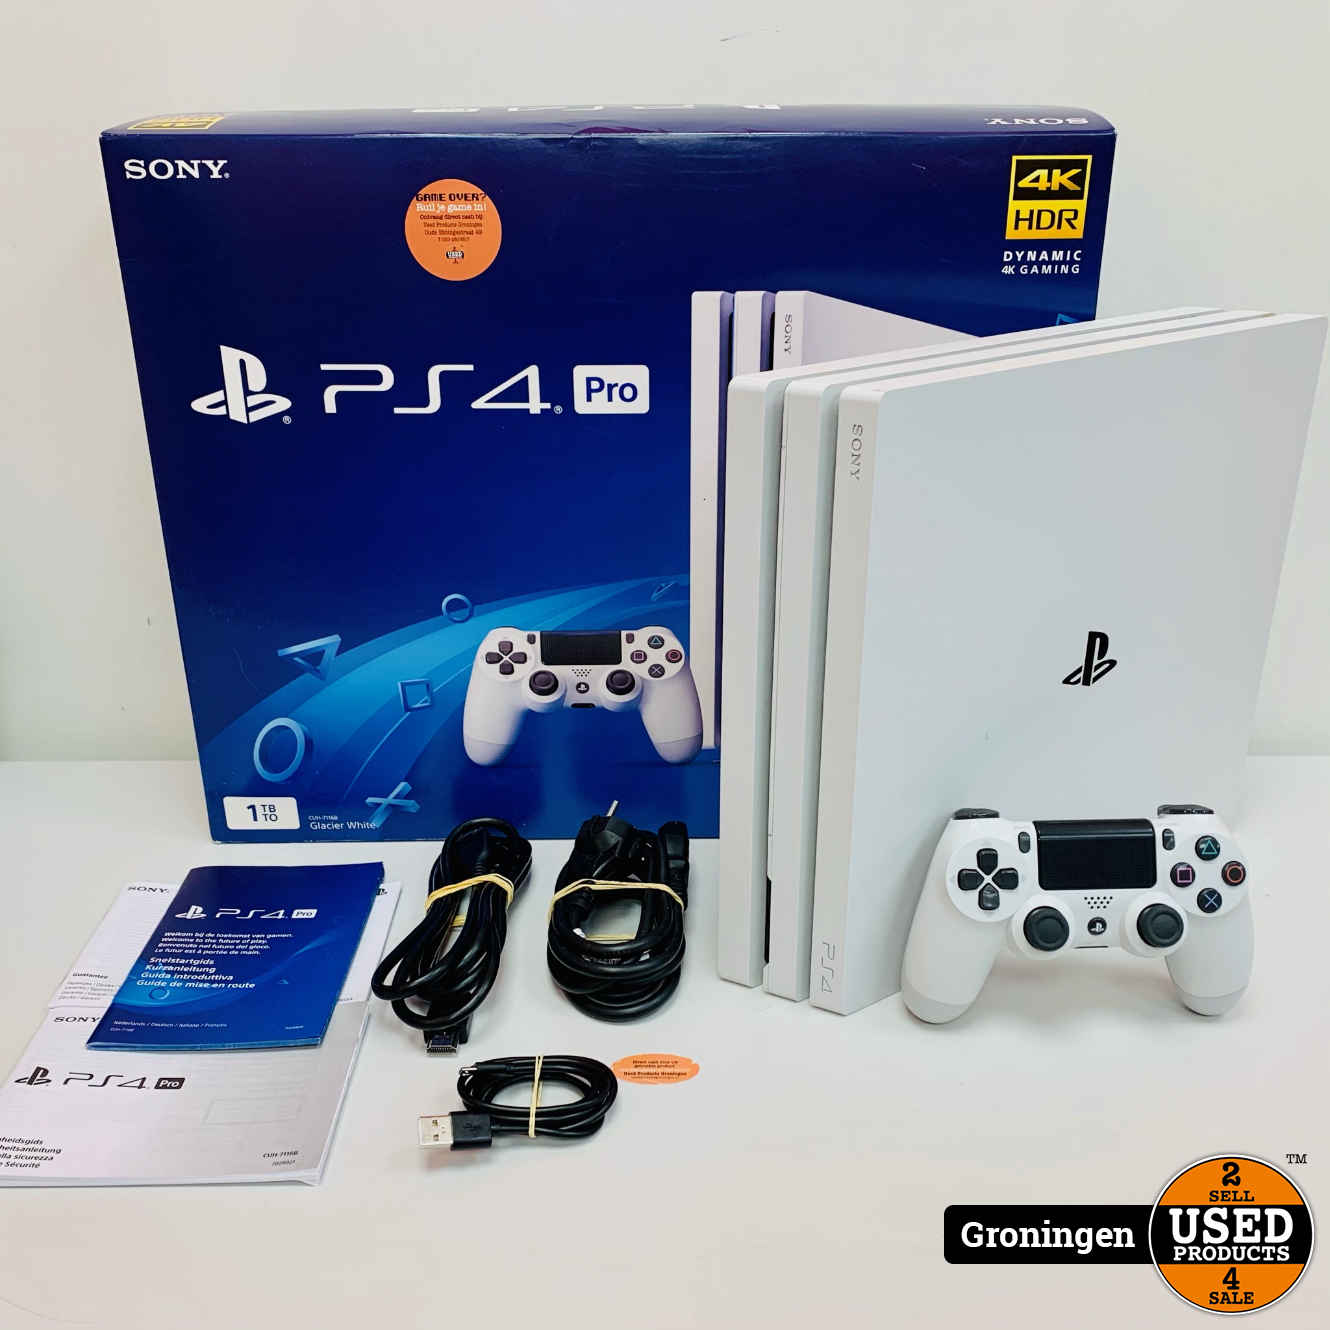 Sony Playstation 4 Pro 1tb Glacier White Cheaper Than Retail Price Buy Clothing Accessories And Lifestyle Products For Women Men